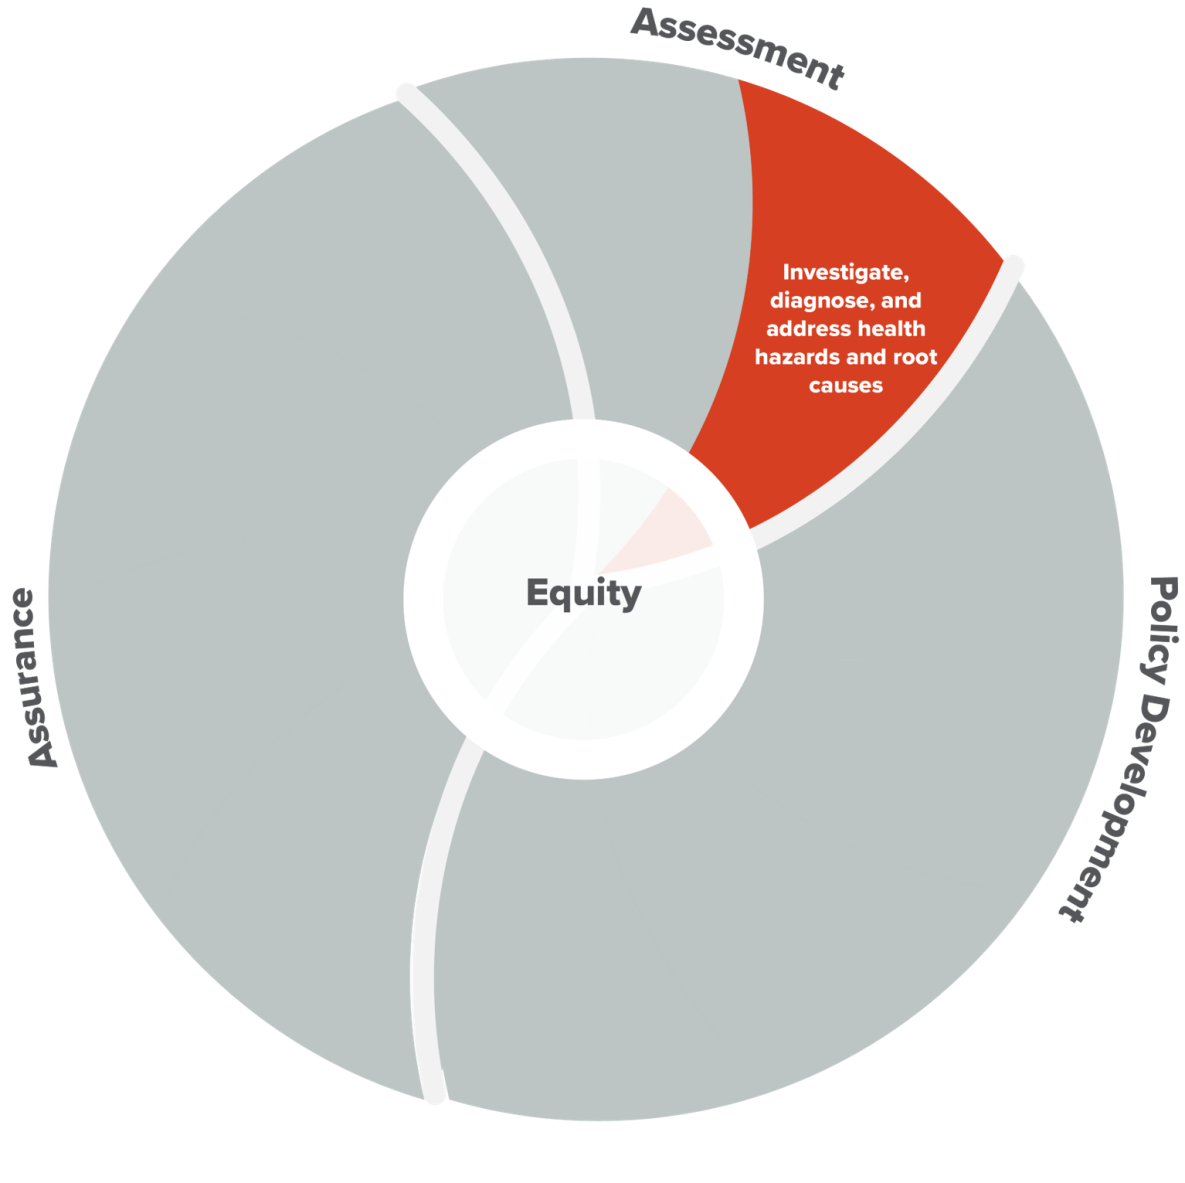 Public health wheel showing essential service 2 in dark color, with equity at the center.